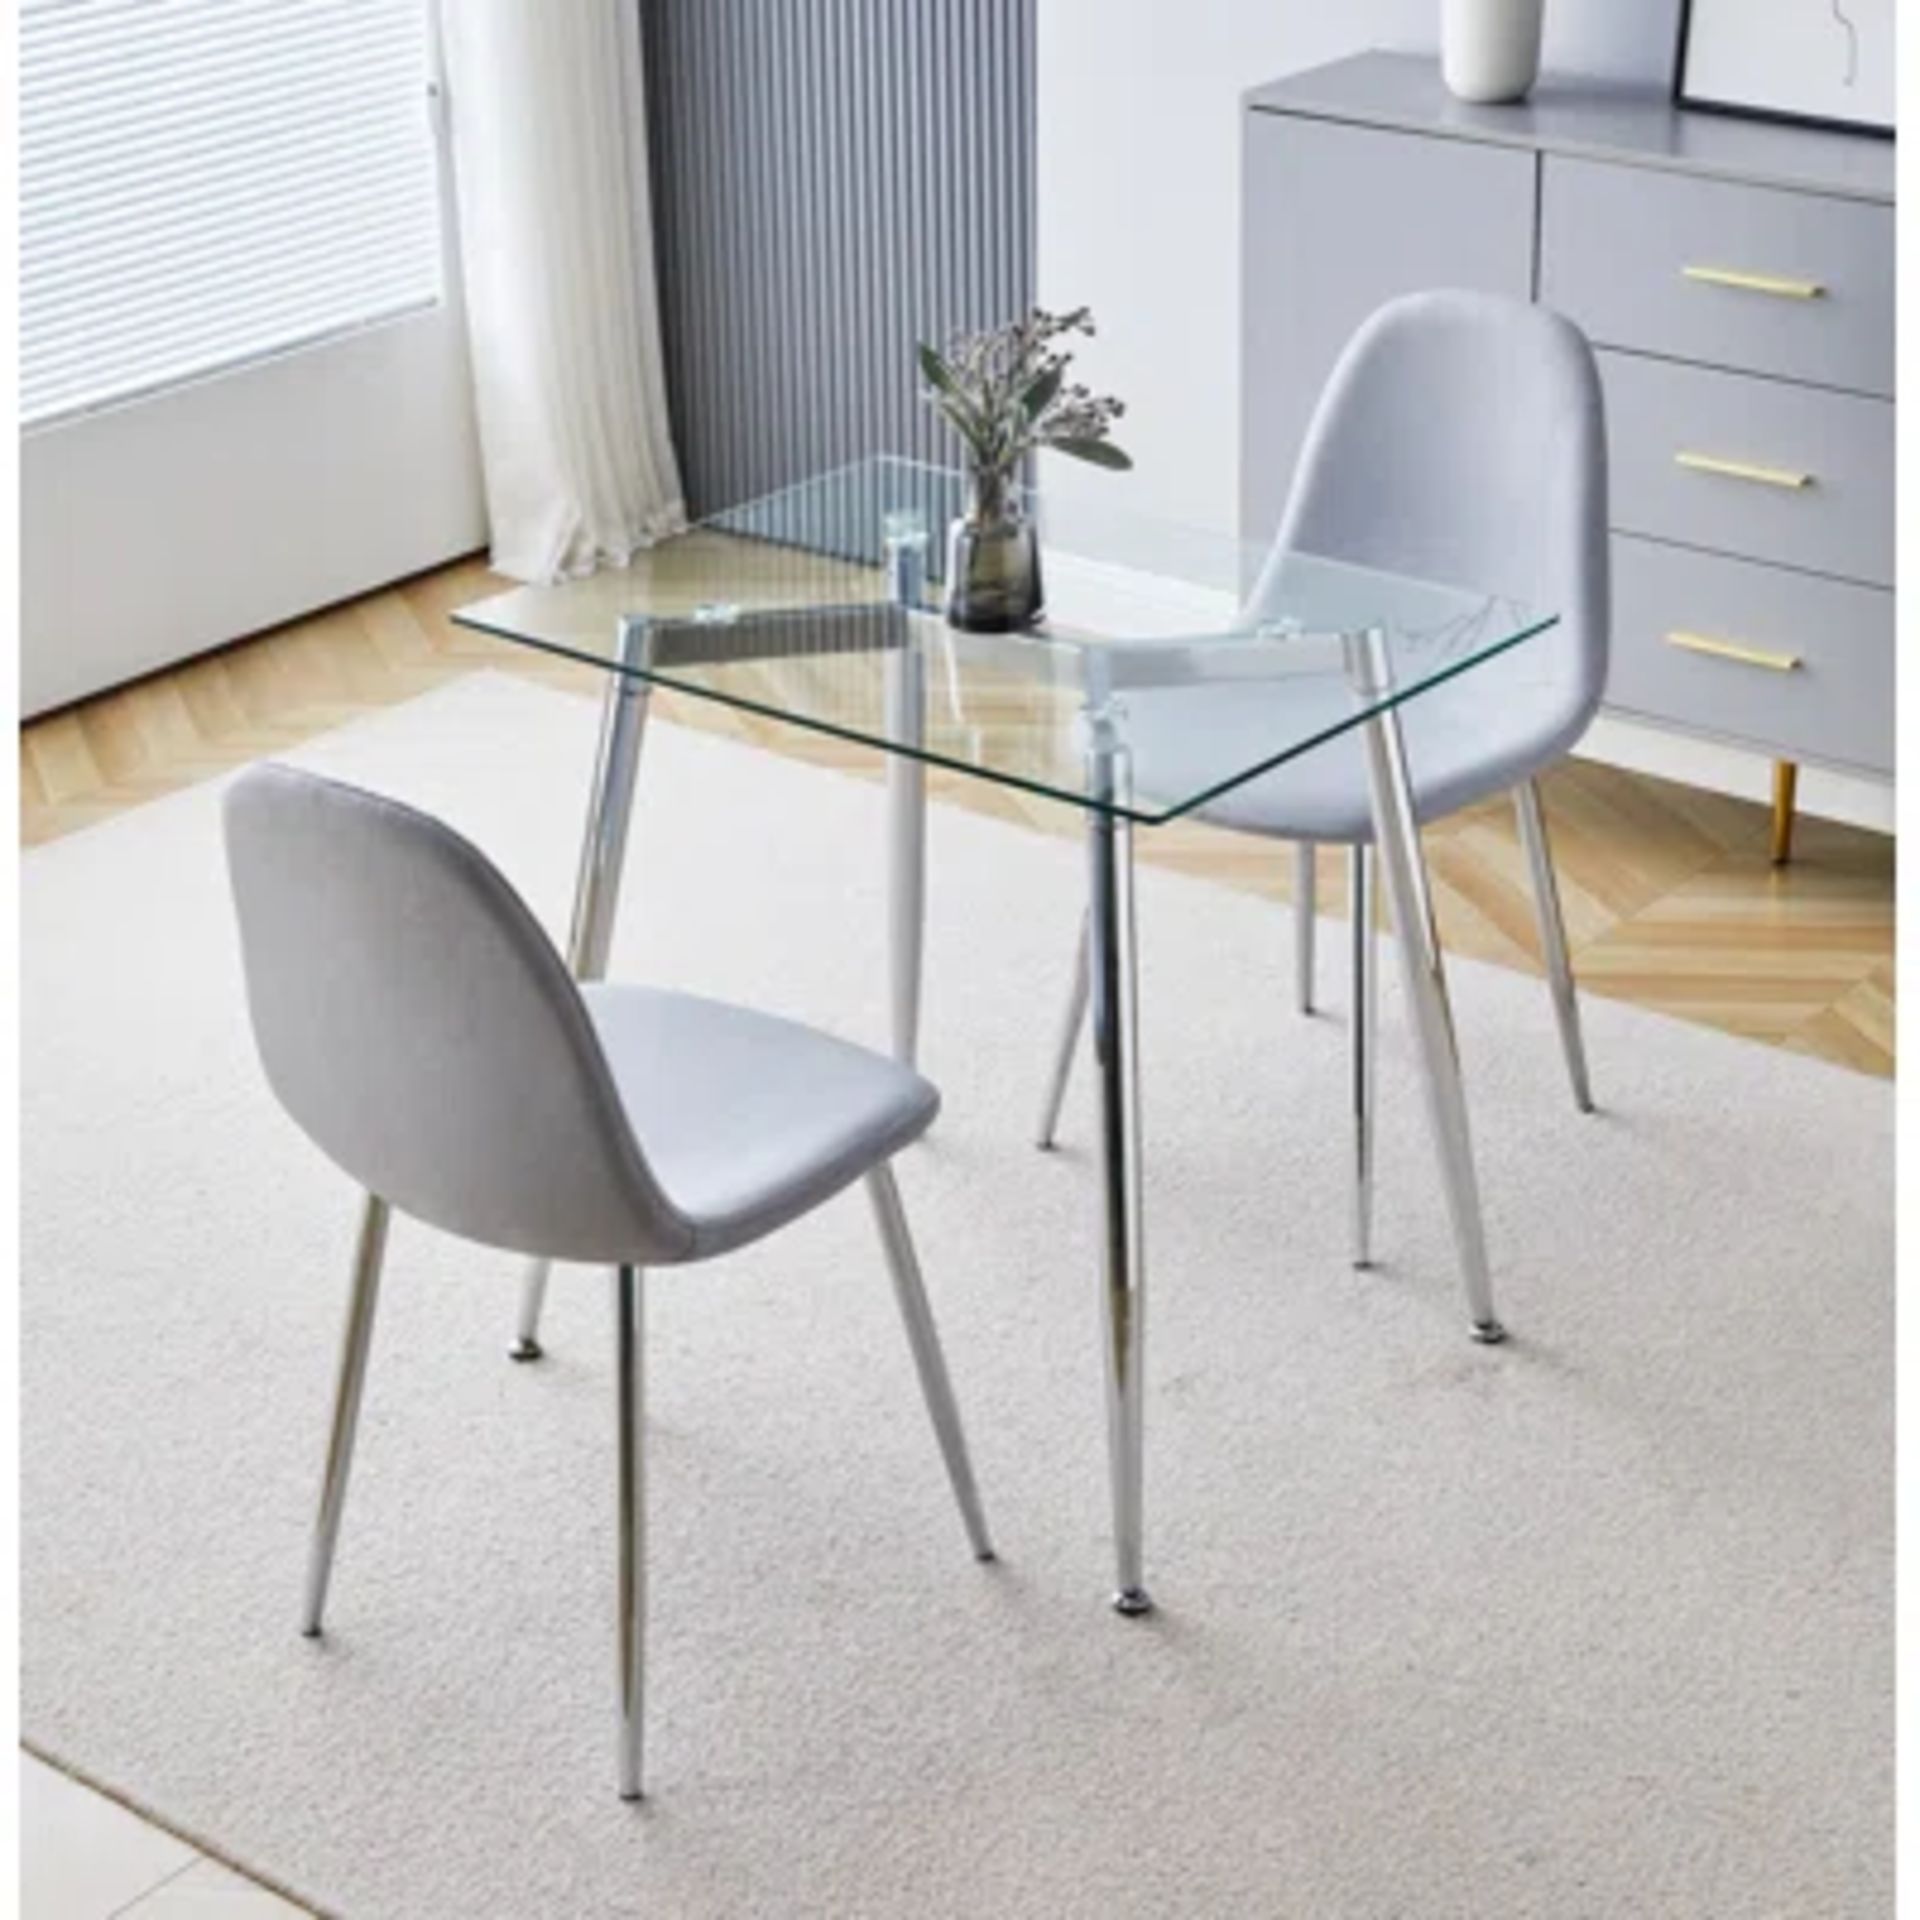 RRP £ 79.99 - Cullompton Small Rectangular Dining Table (TAB701, 80X60cm) With Glass Top And